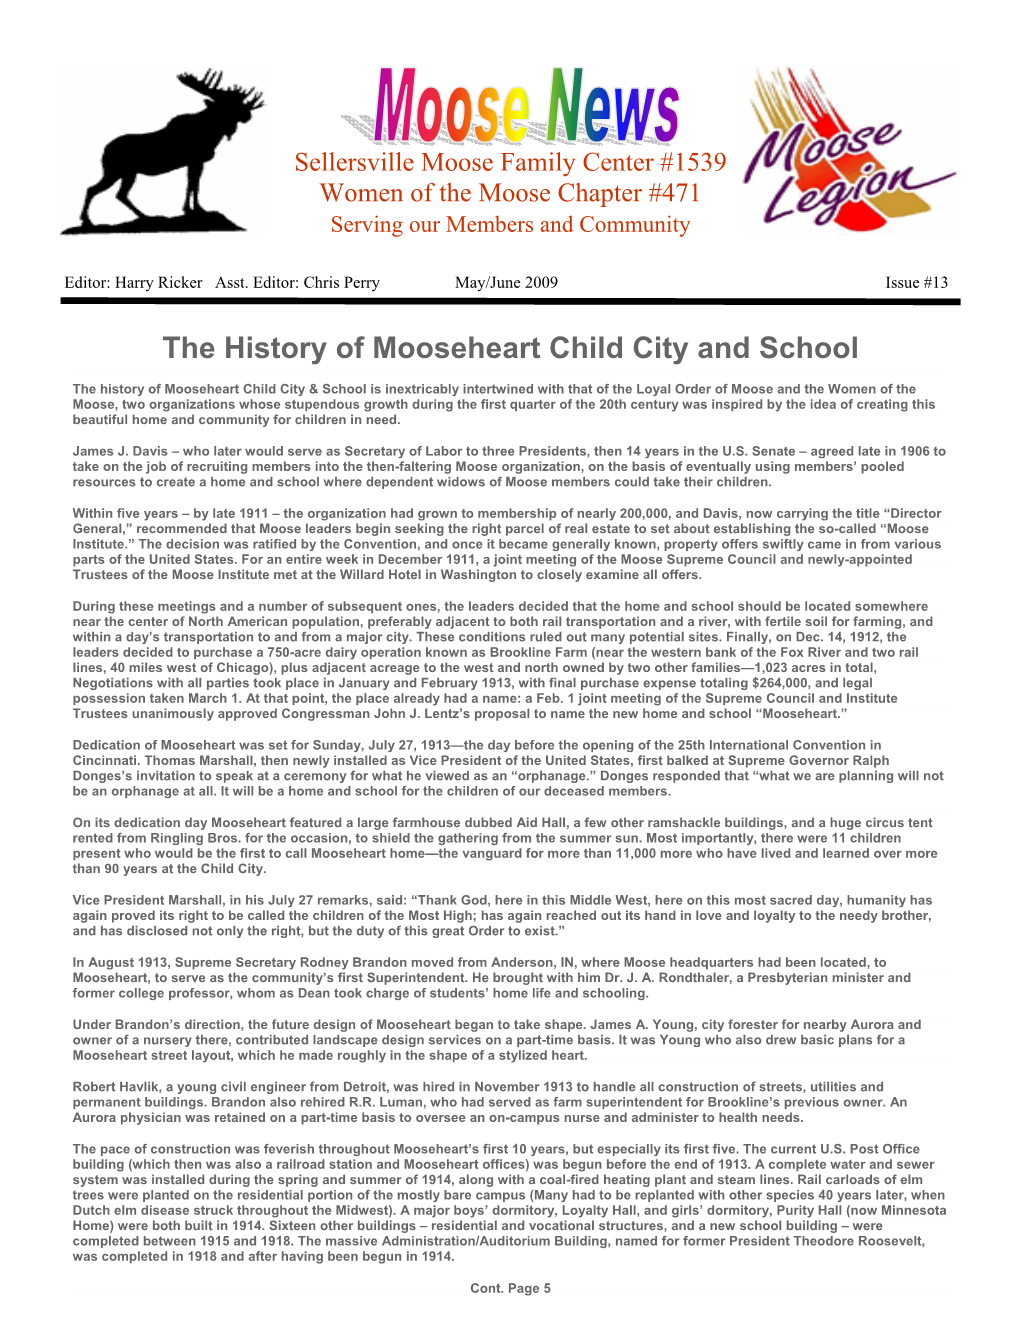 The History of Mooseheart Child City and School